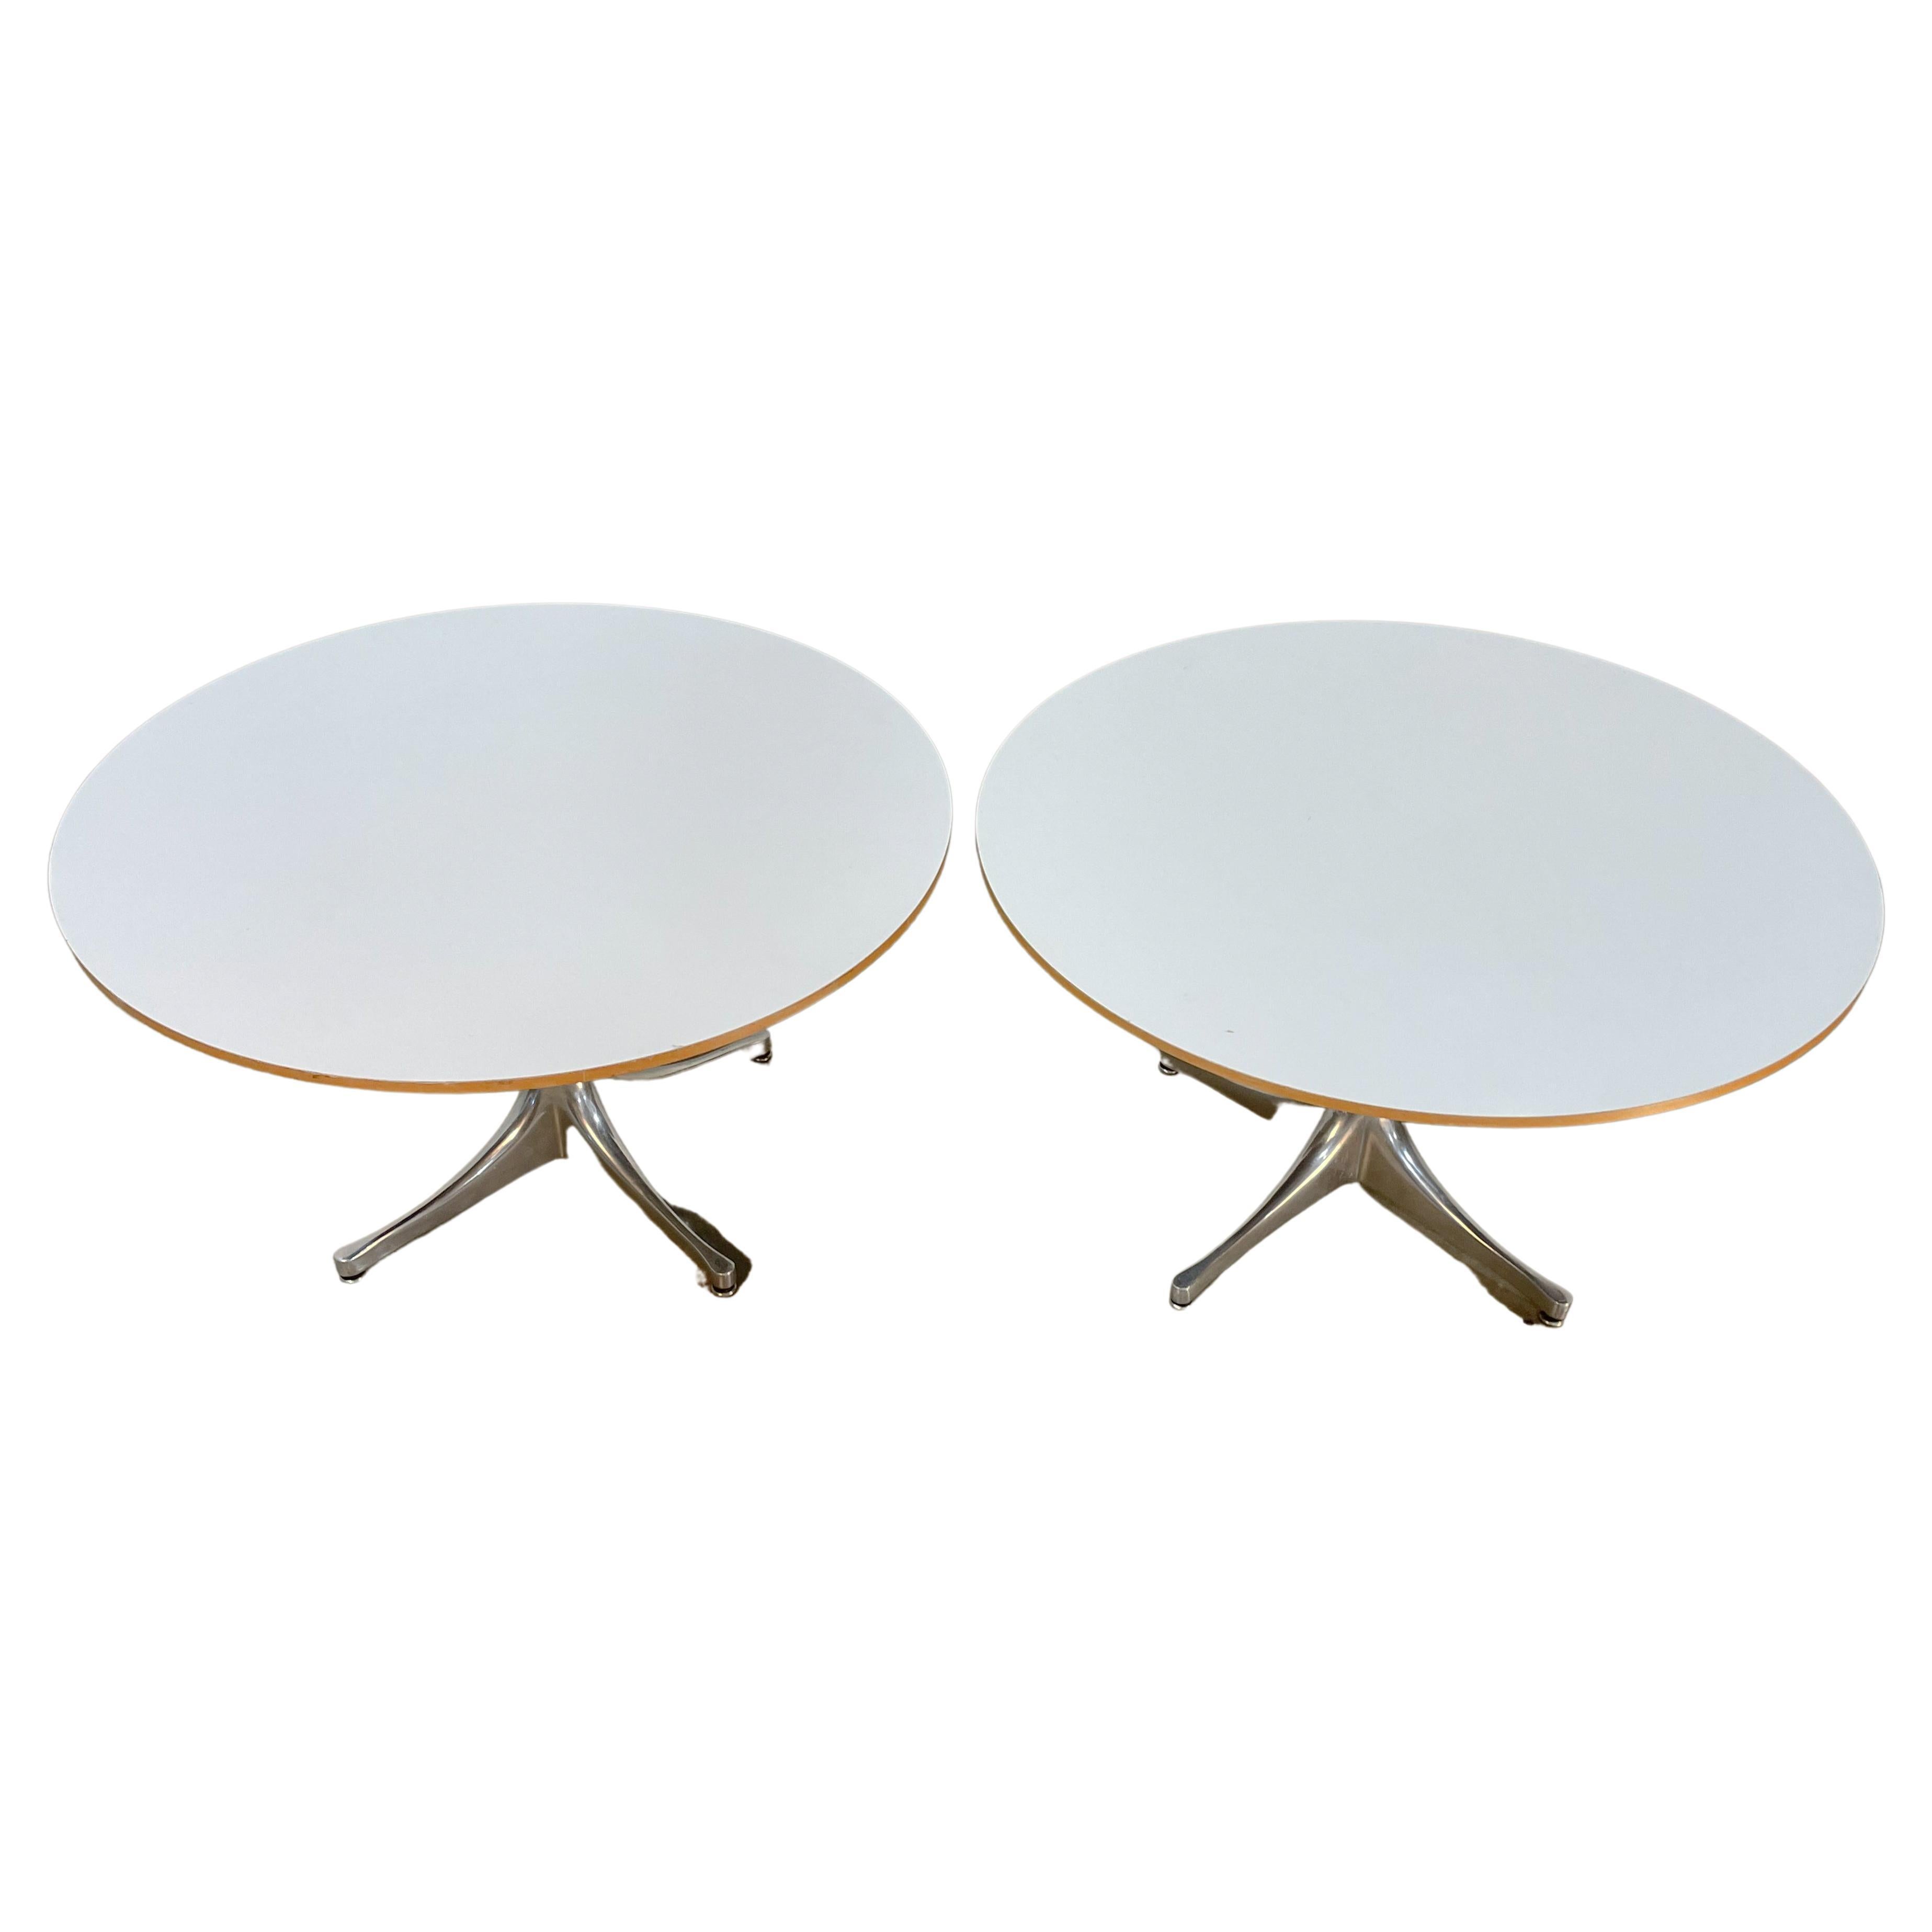 Minimalist chrome pedestal tables with white Formica tops designed by George Nelson for Herman Miller. The cast aluminum legs have a sculptural quality and give the tops a floating effect. Made in the 1970s, these vintage tables are in very good